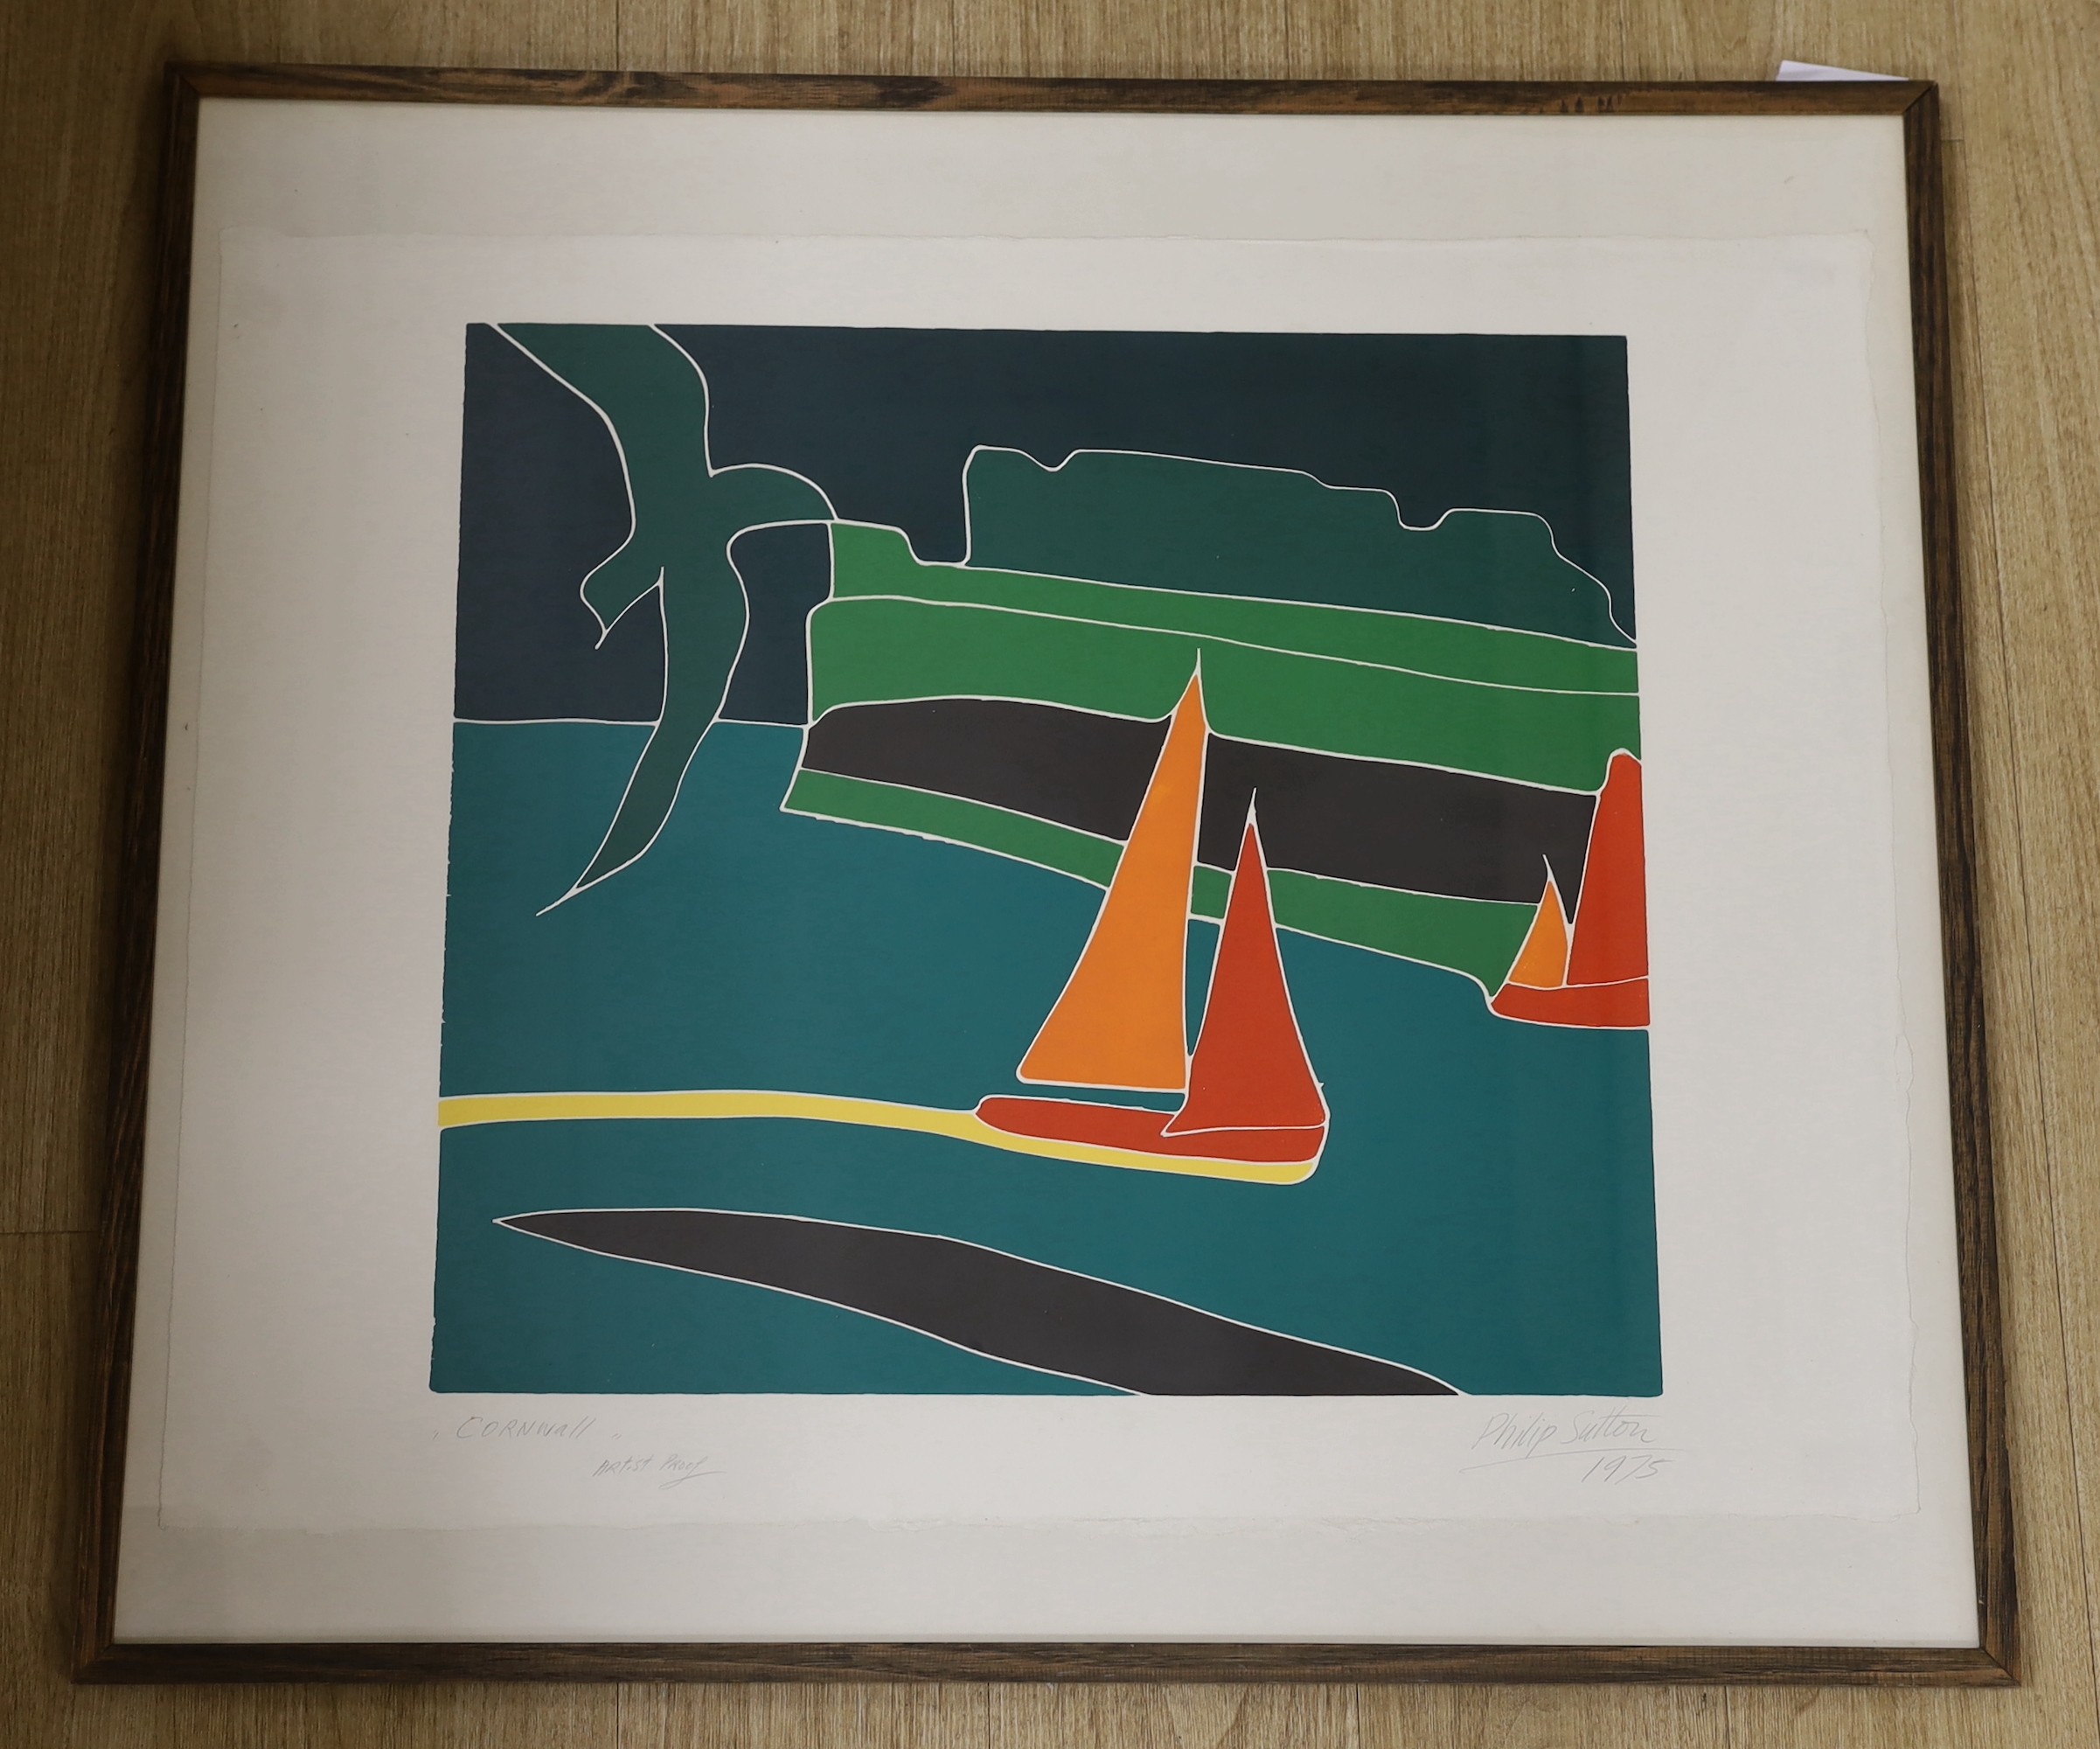 Philip Sutton RA (1928-), artist proof print, 'Cornwall', signed in pencil and dated 1975, 56 x 61cm, sheet overall 67 x 87cm